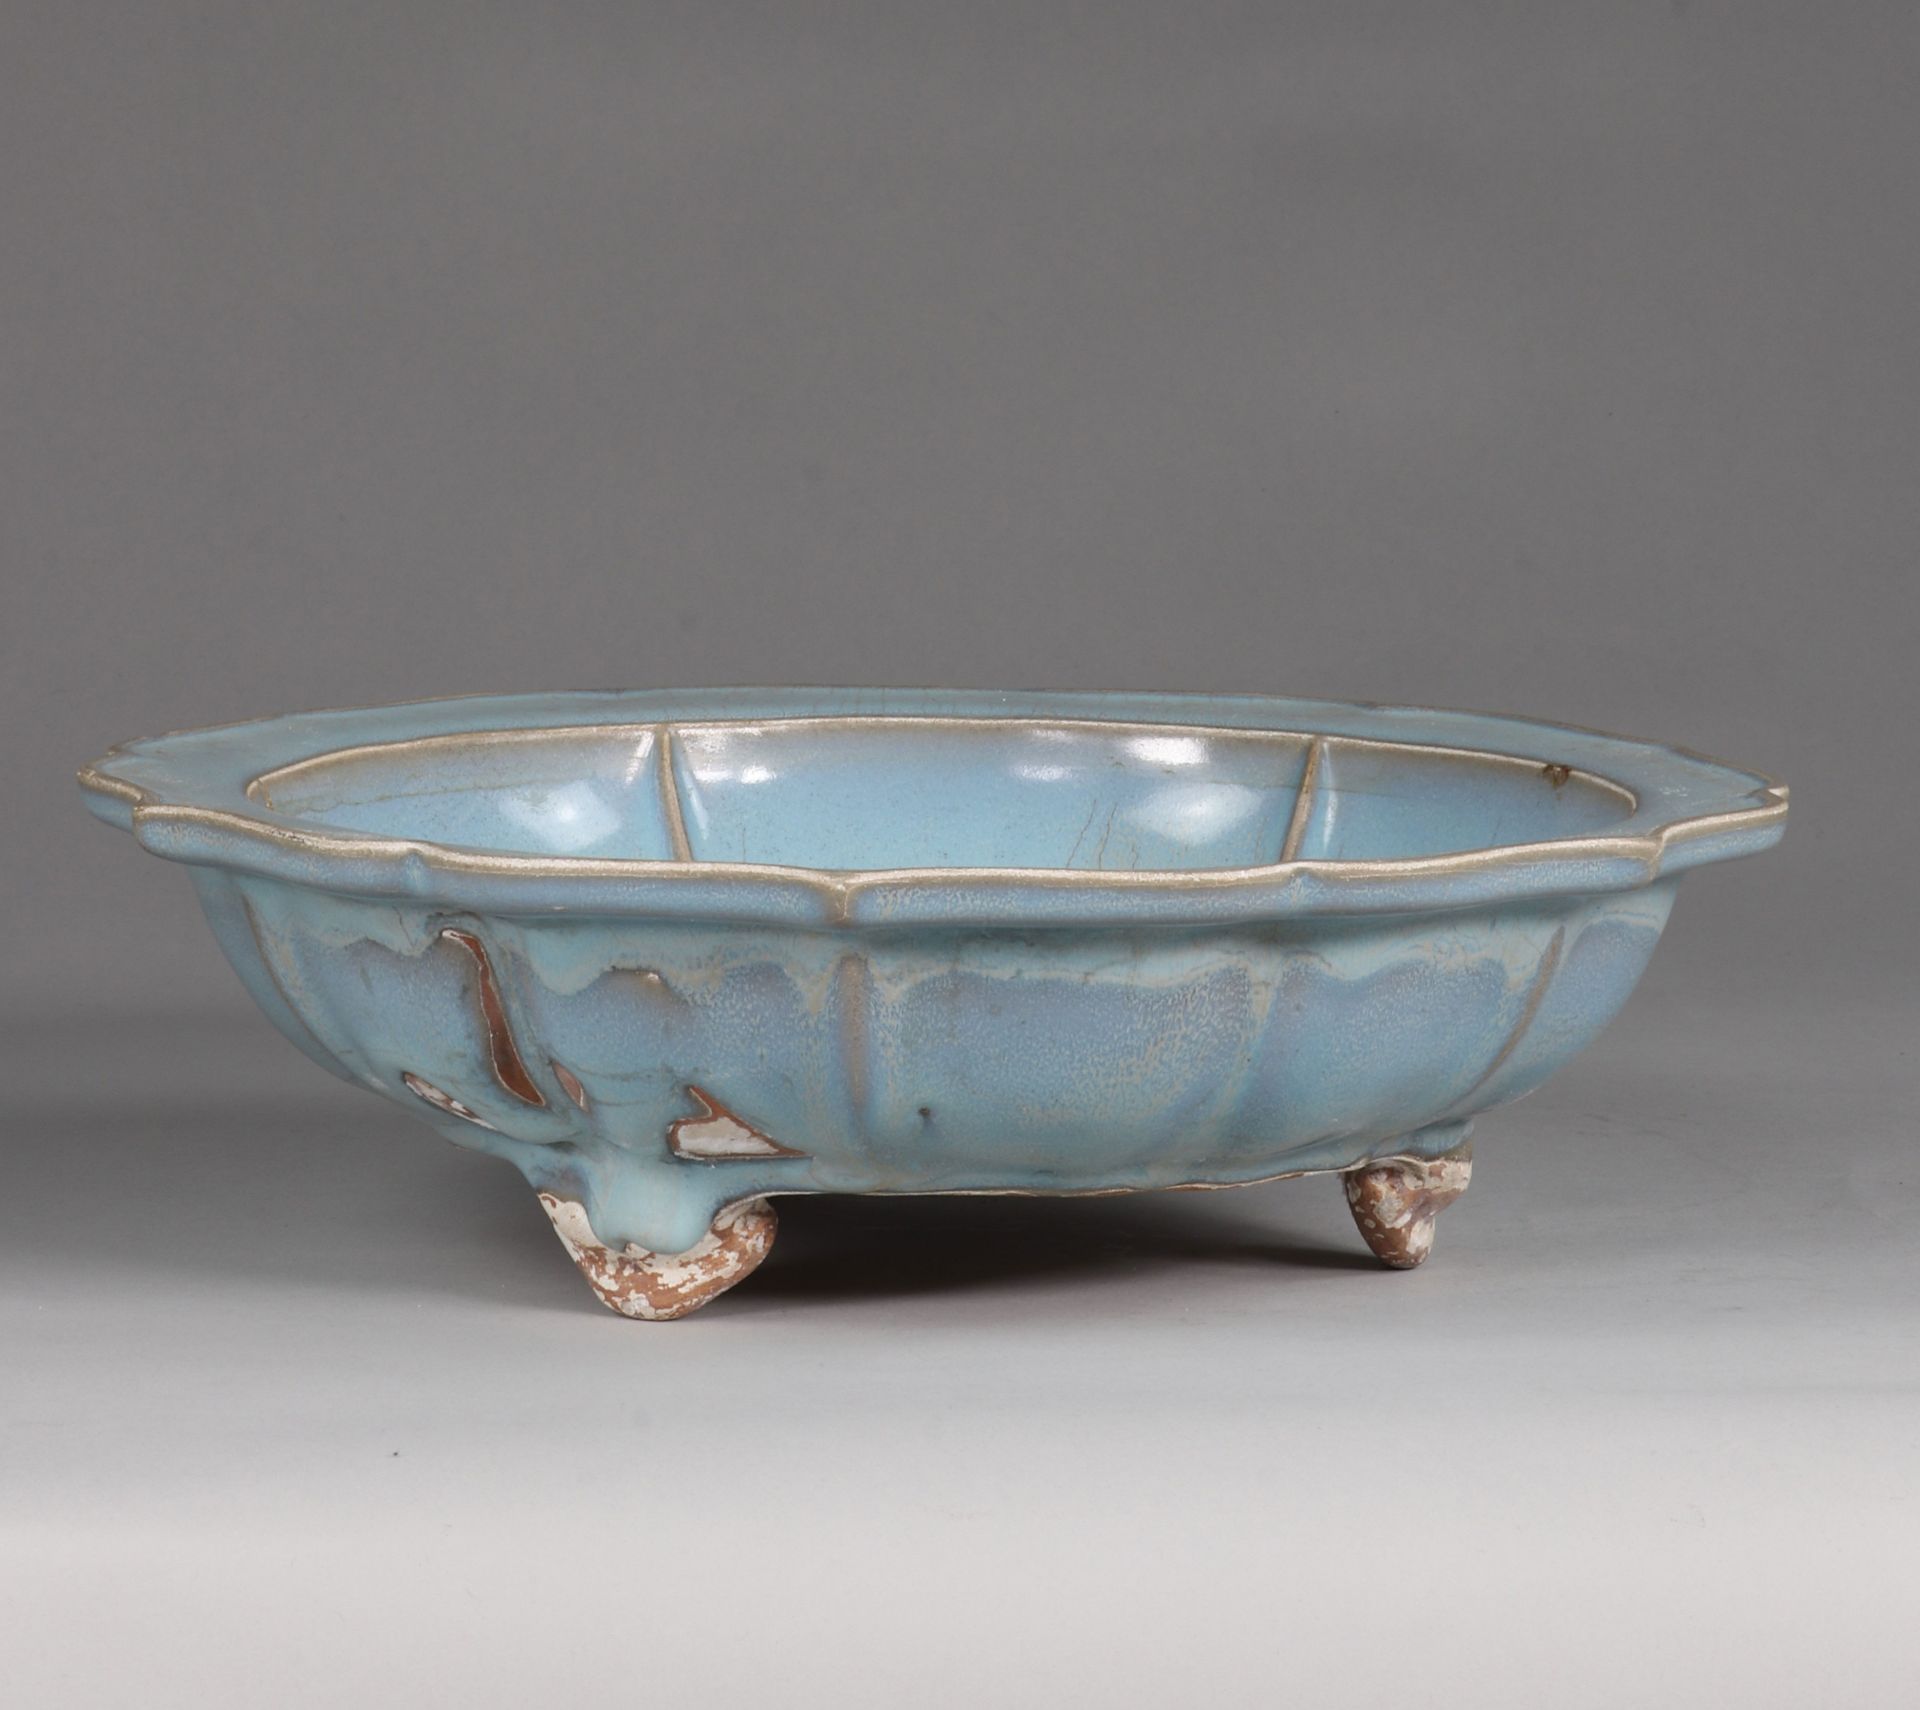 China large cup with Narcissus,: -a Ru-Yao Yun-Related Narcissus bowl- Song of the North. - Image 3 of 3